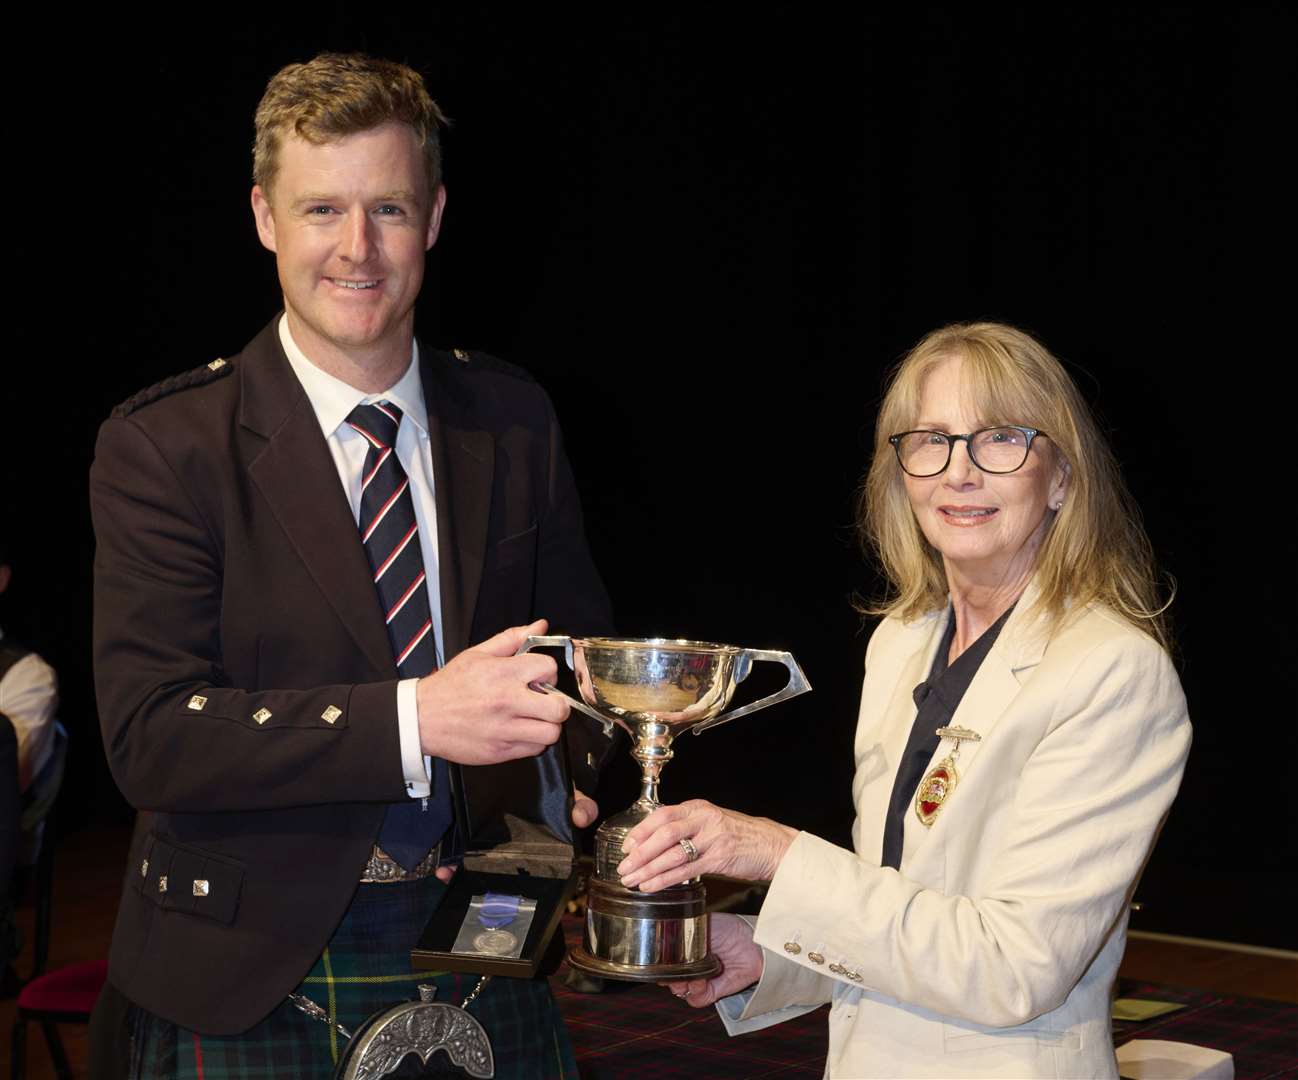 Glynis Campbell-Sinclair (the Provost of Inverness) with William Rowe who won the 1st Silver Medal at the Northern Meeting 2022 which was held at Eden Court in Inverness.